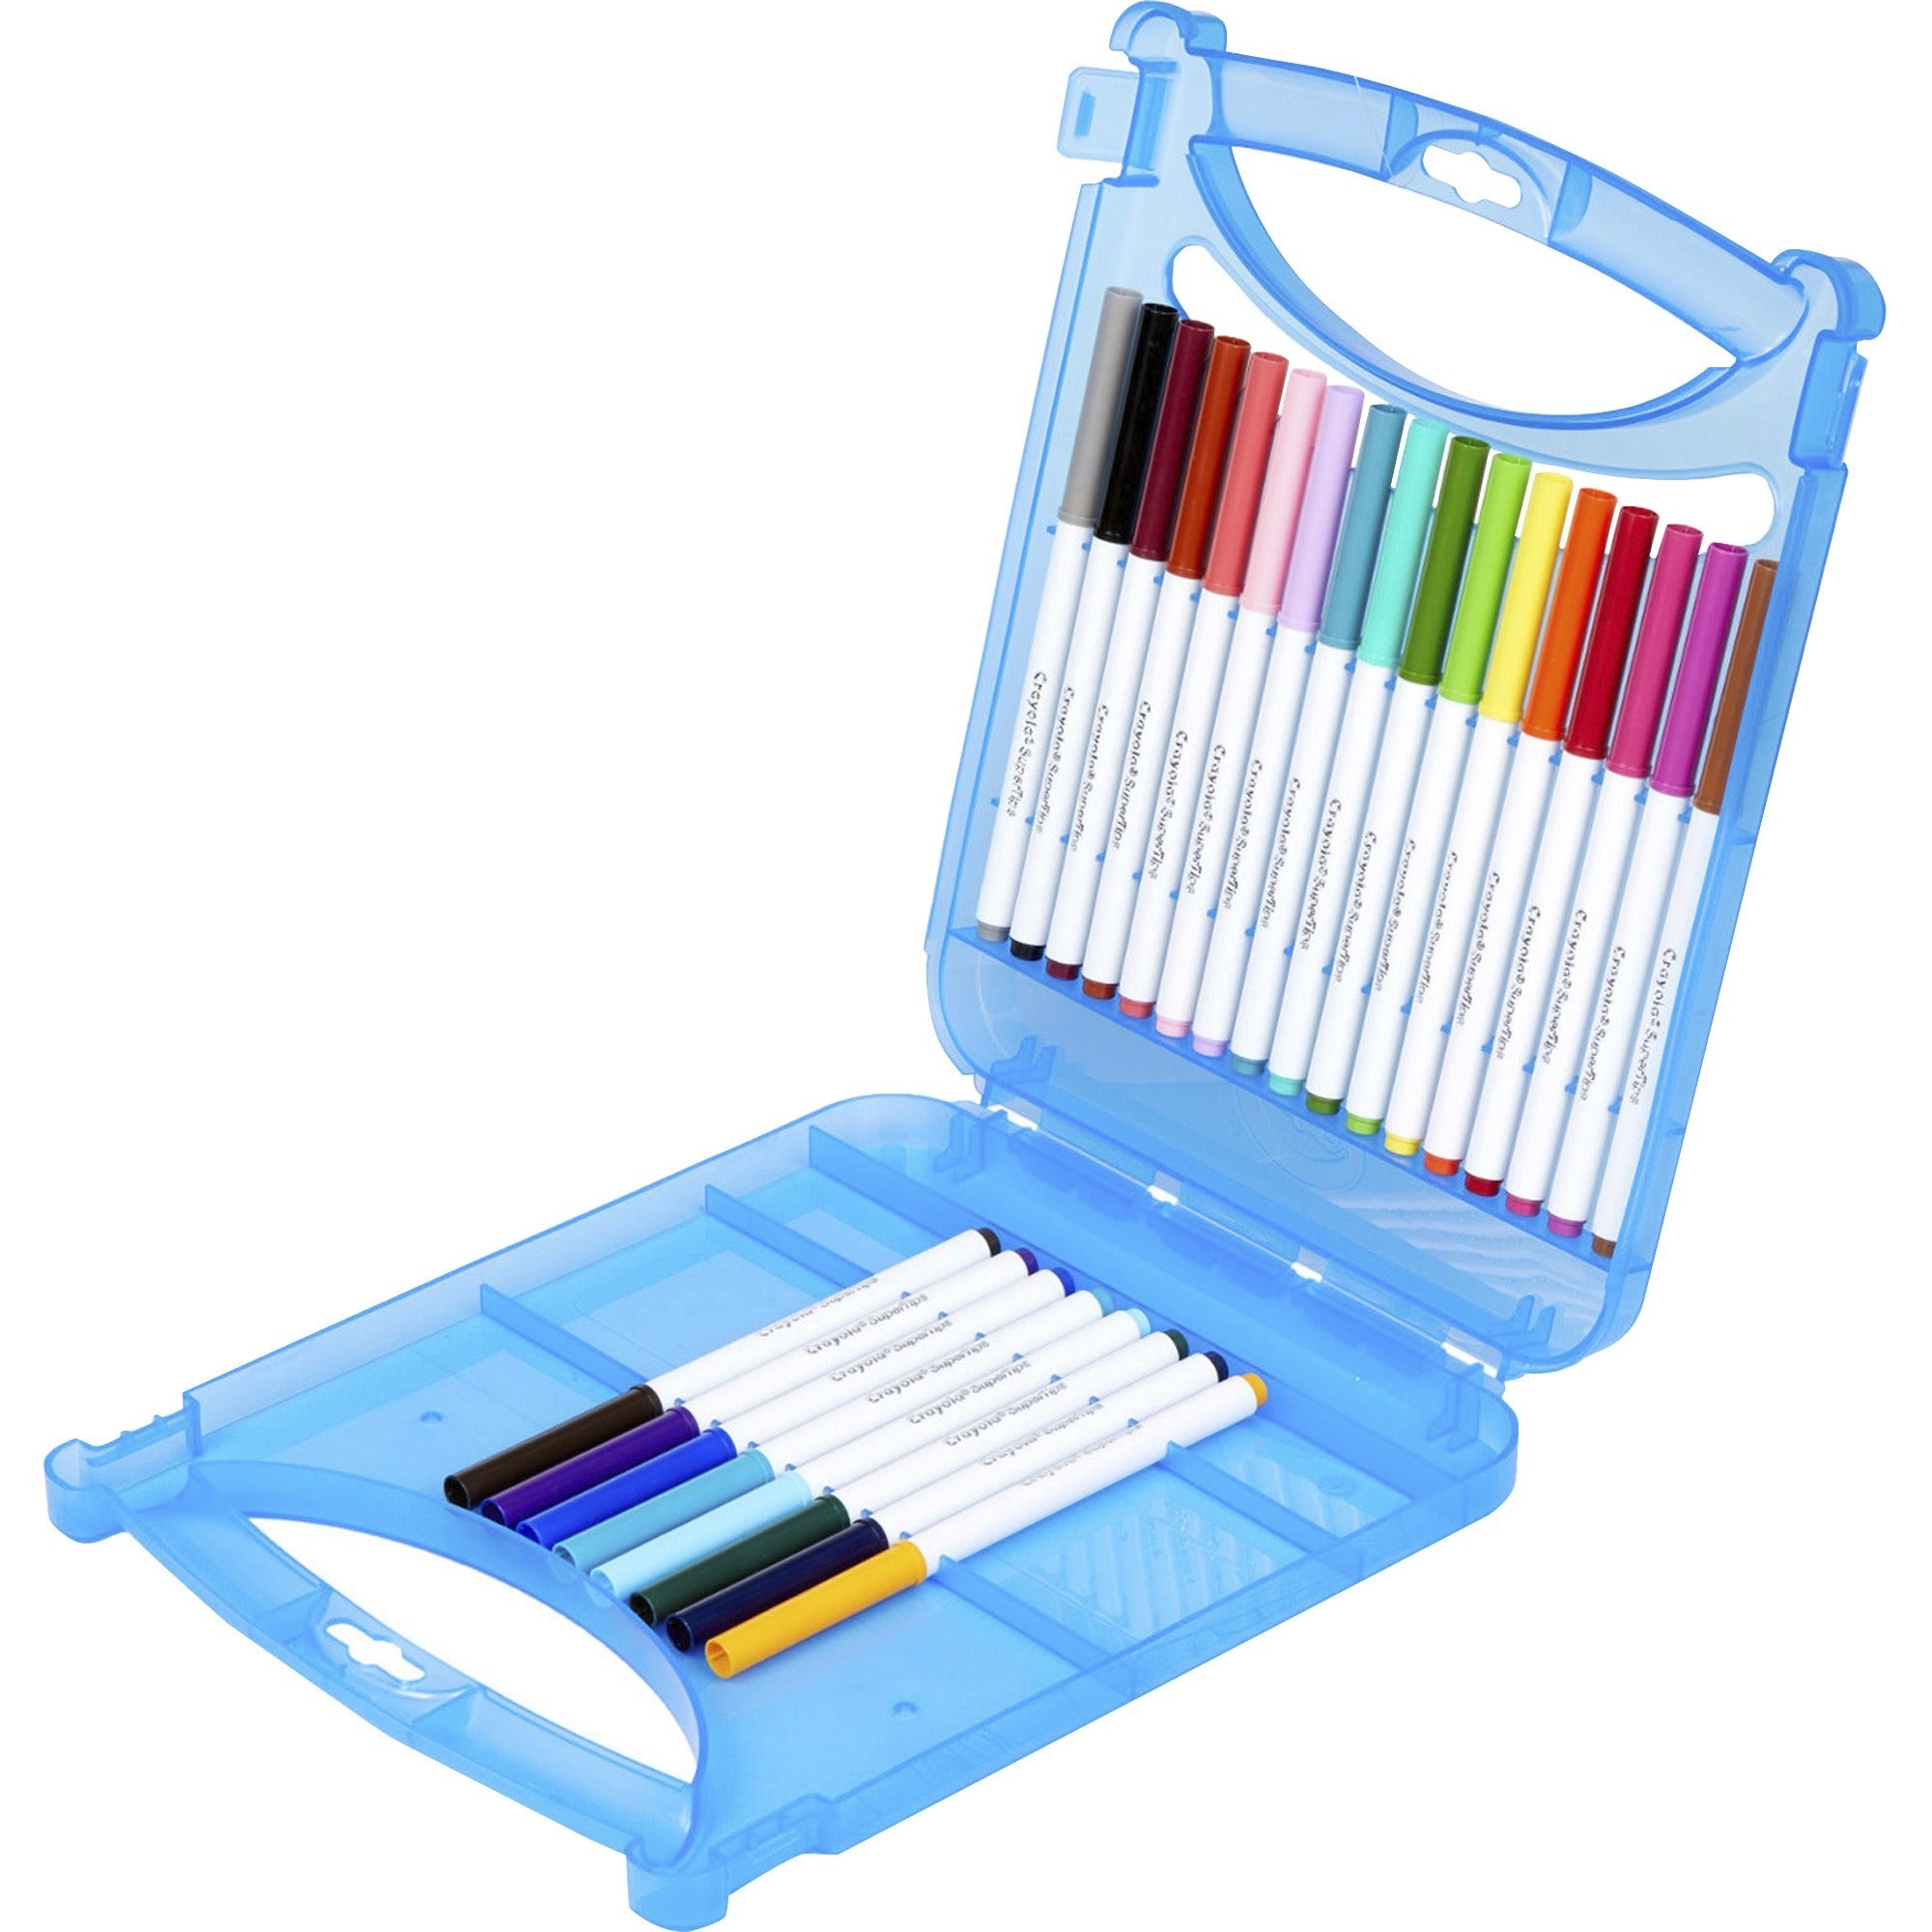 crayola-super-tips-art-kit-classroom-home-art-recommended-for-4-year-65-pieces-125height-x-925width-x-1130length-1-kit-assorted_cyo040377 - 1